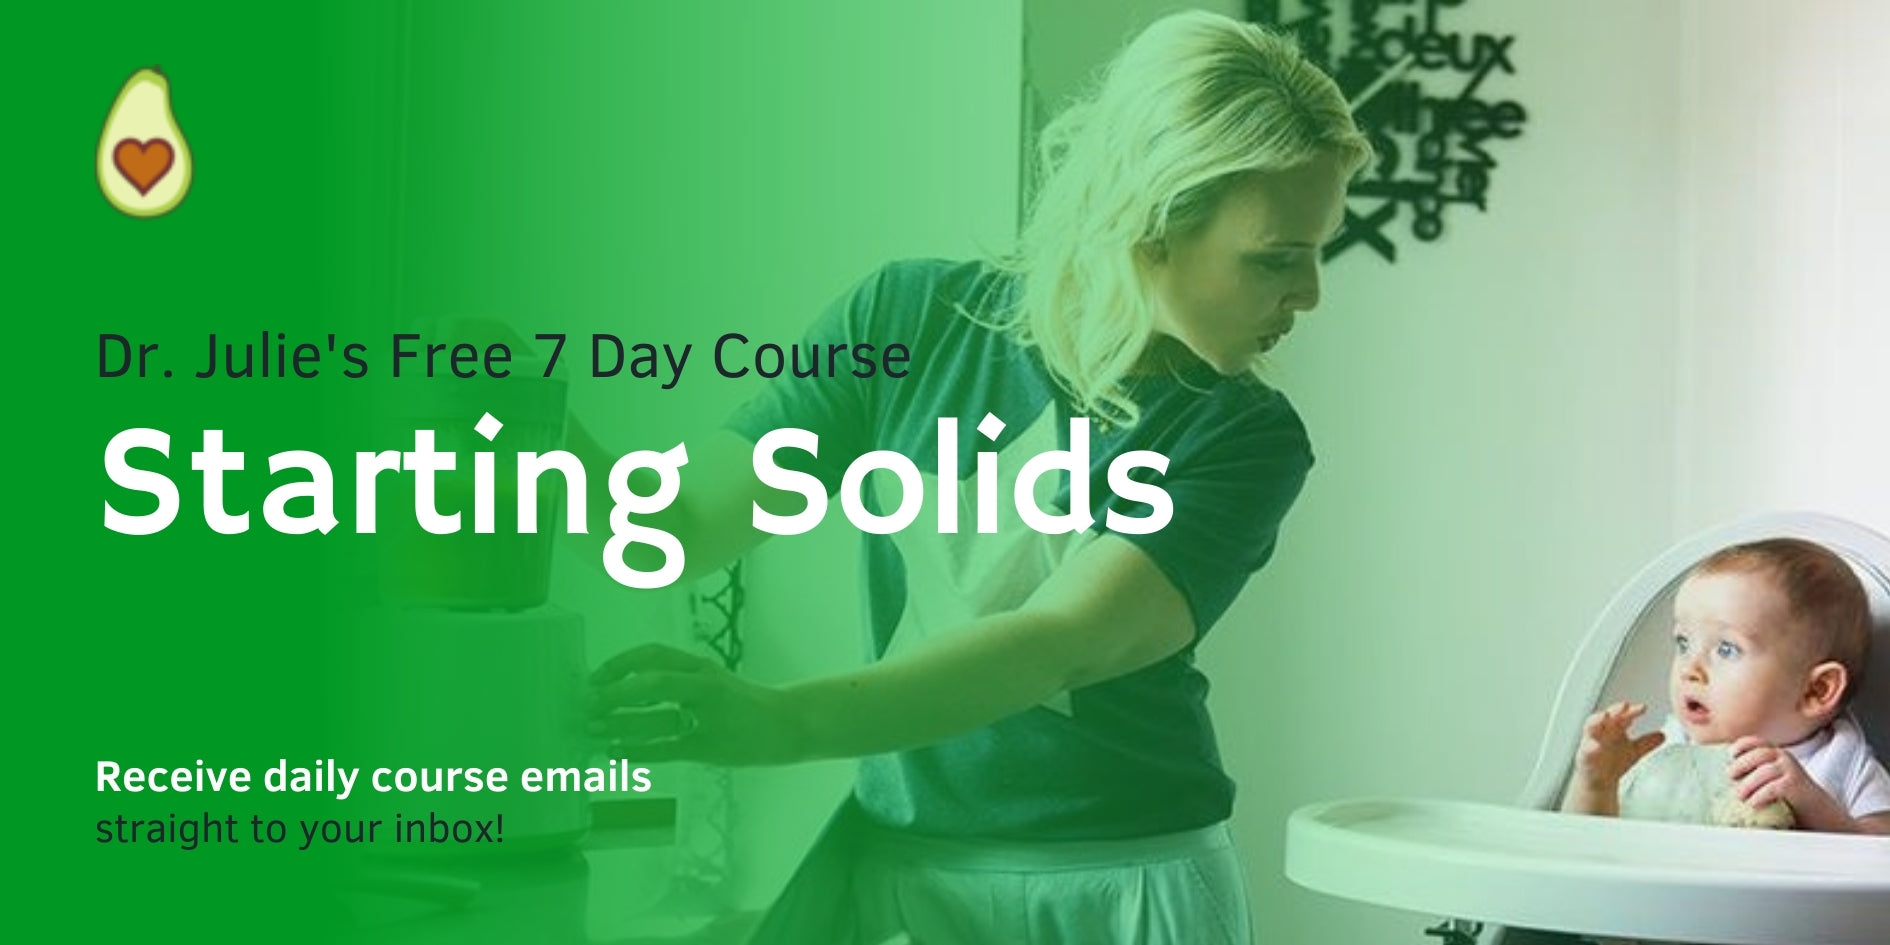 Free 7 Day Course - Starting Solids with Dr. Julie Bhosale